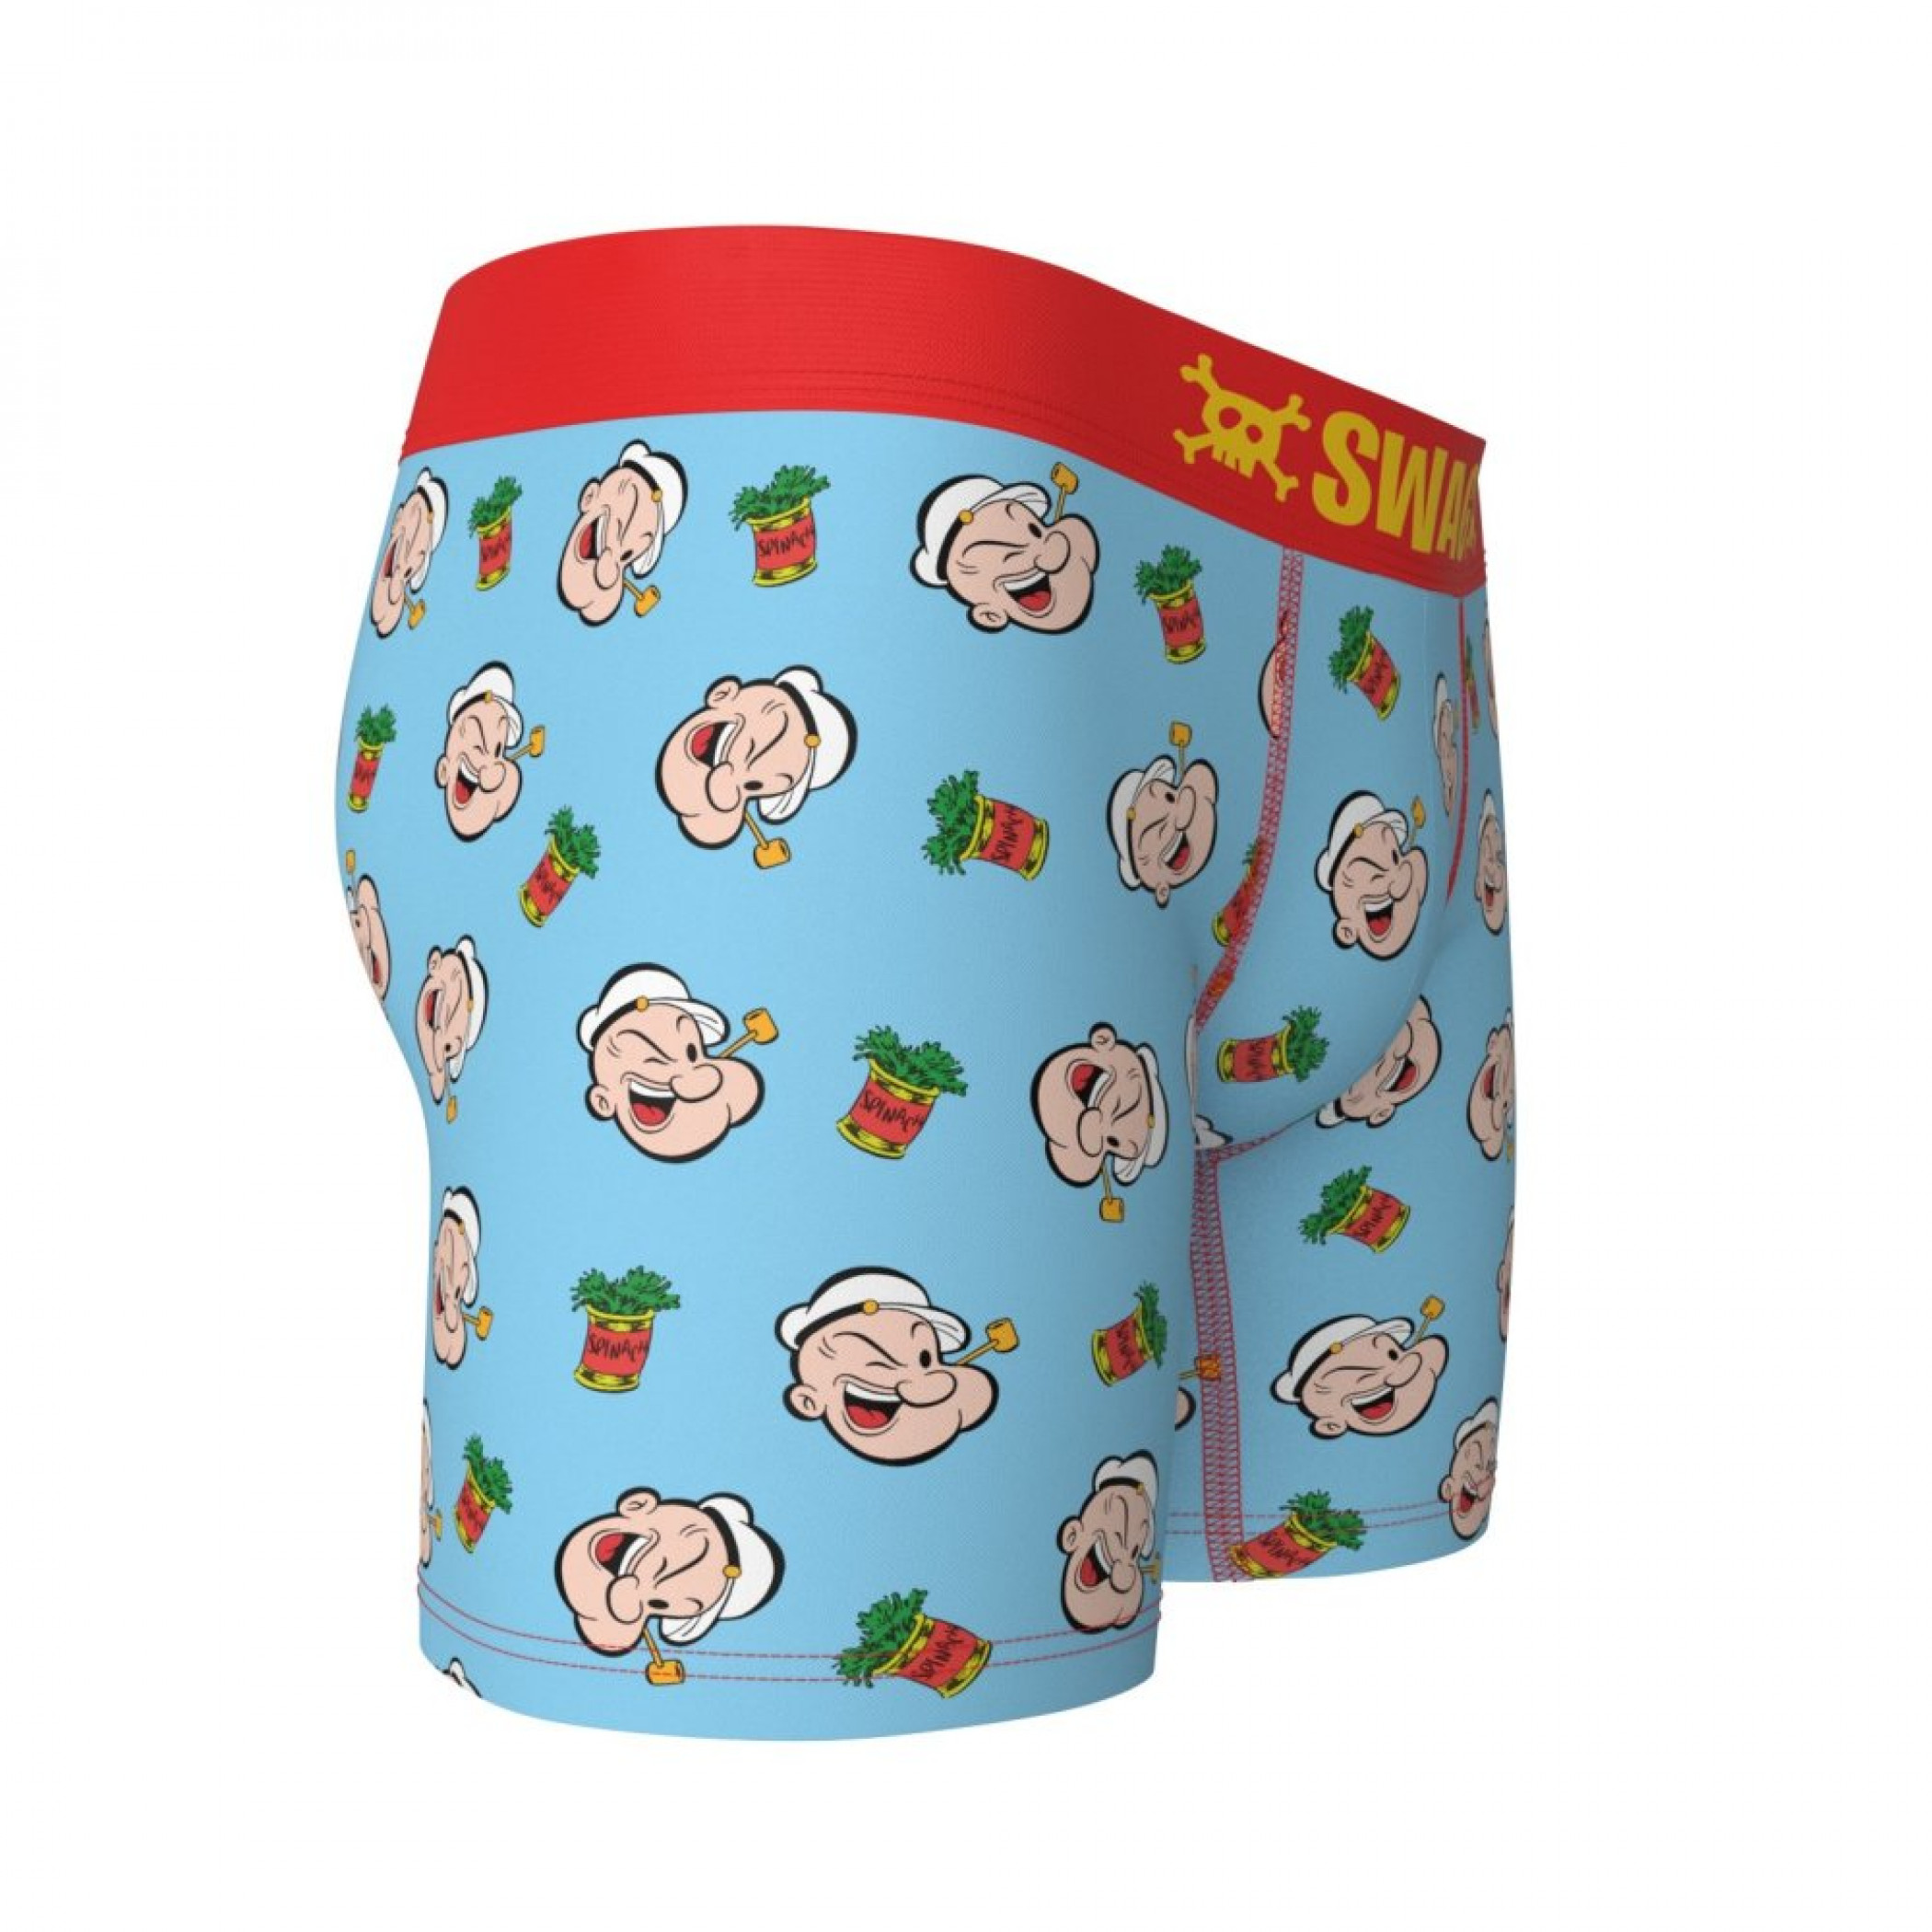 Popeye The Sailor Faces and Spinach Can AOP SWAG Boxer Briefs